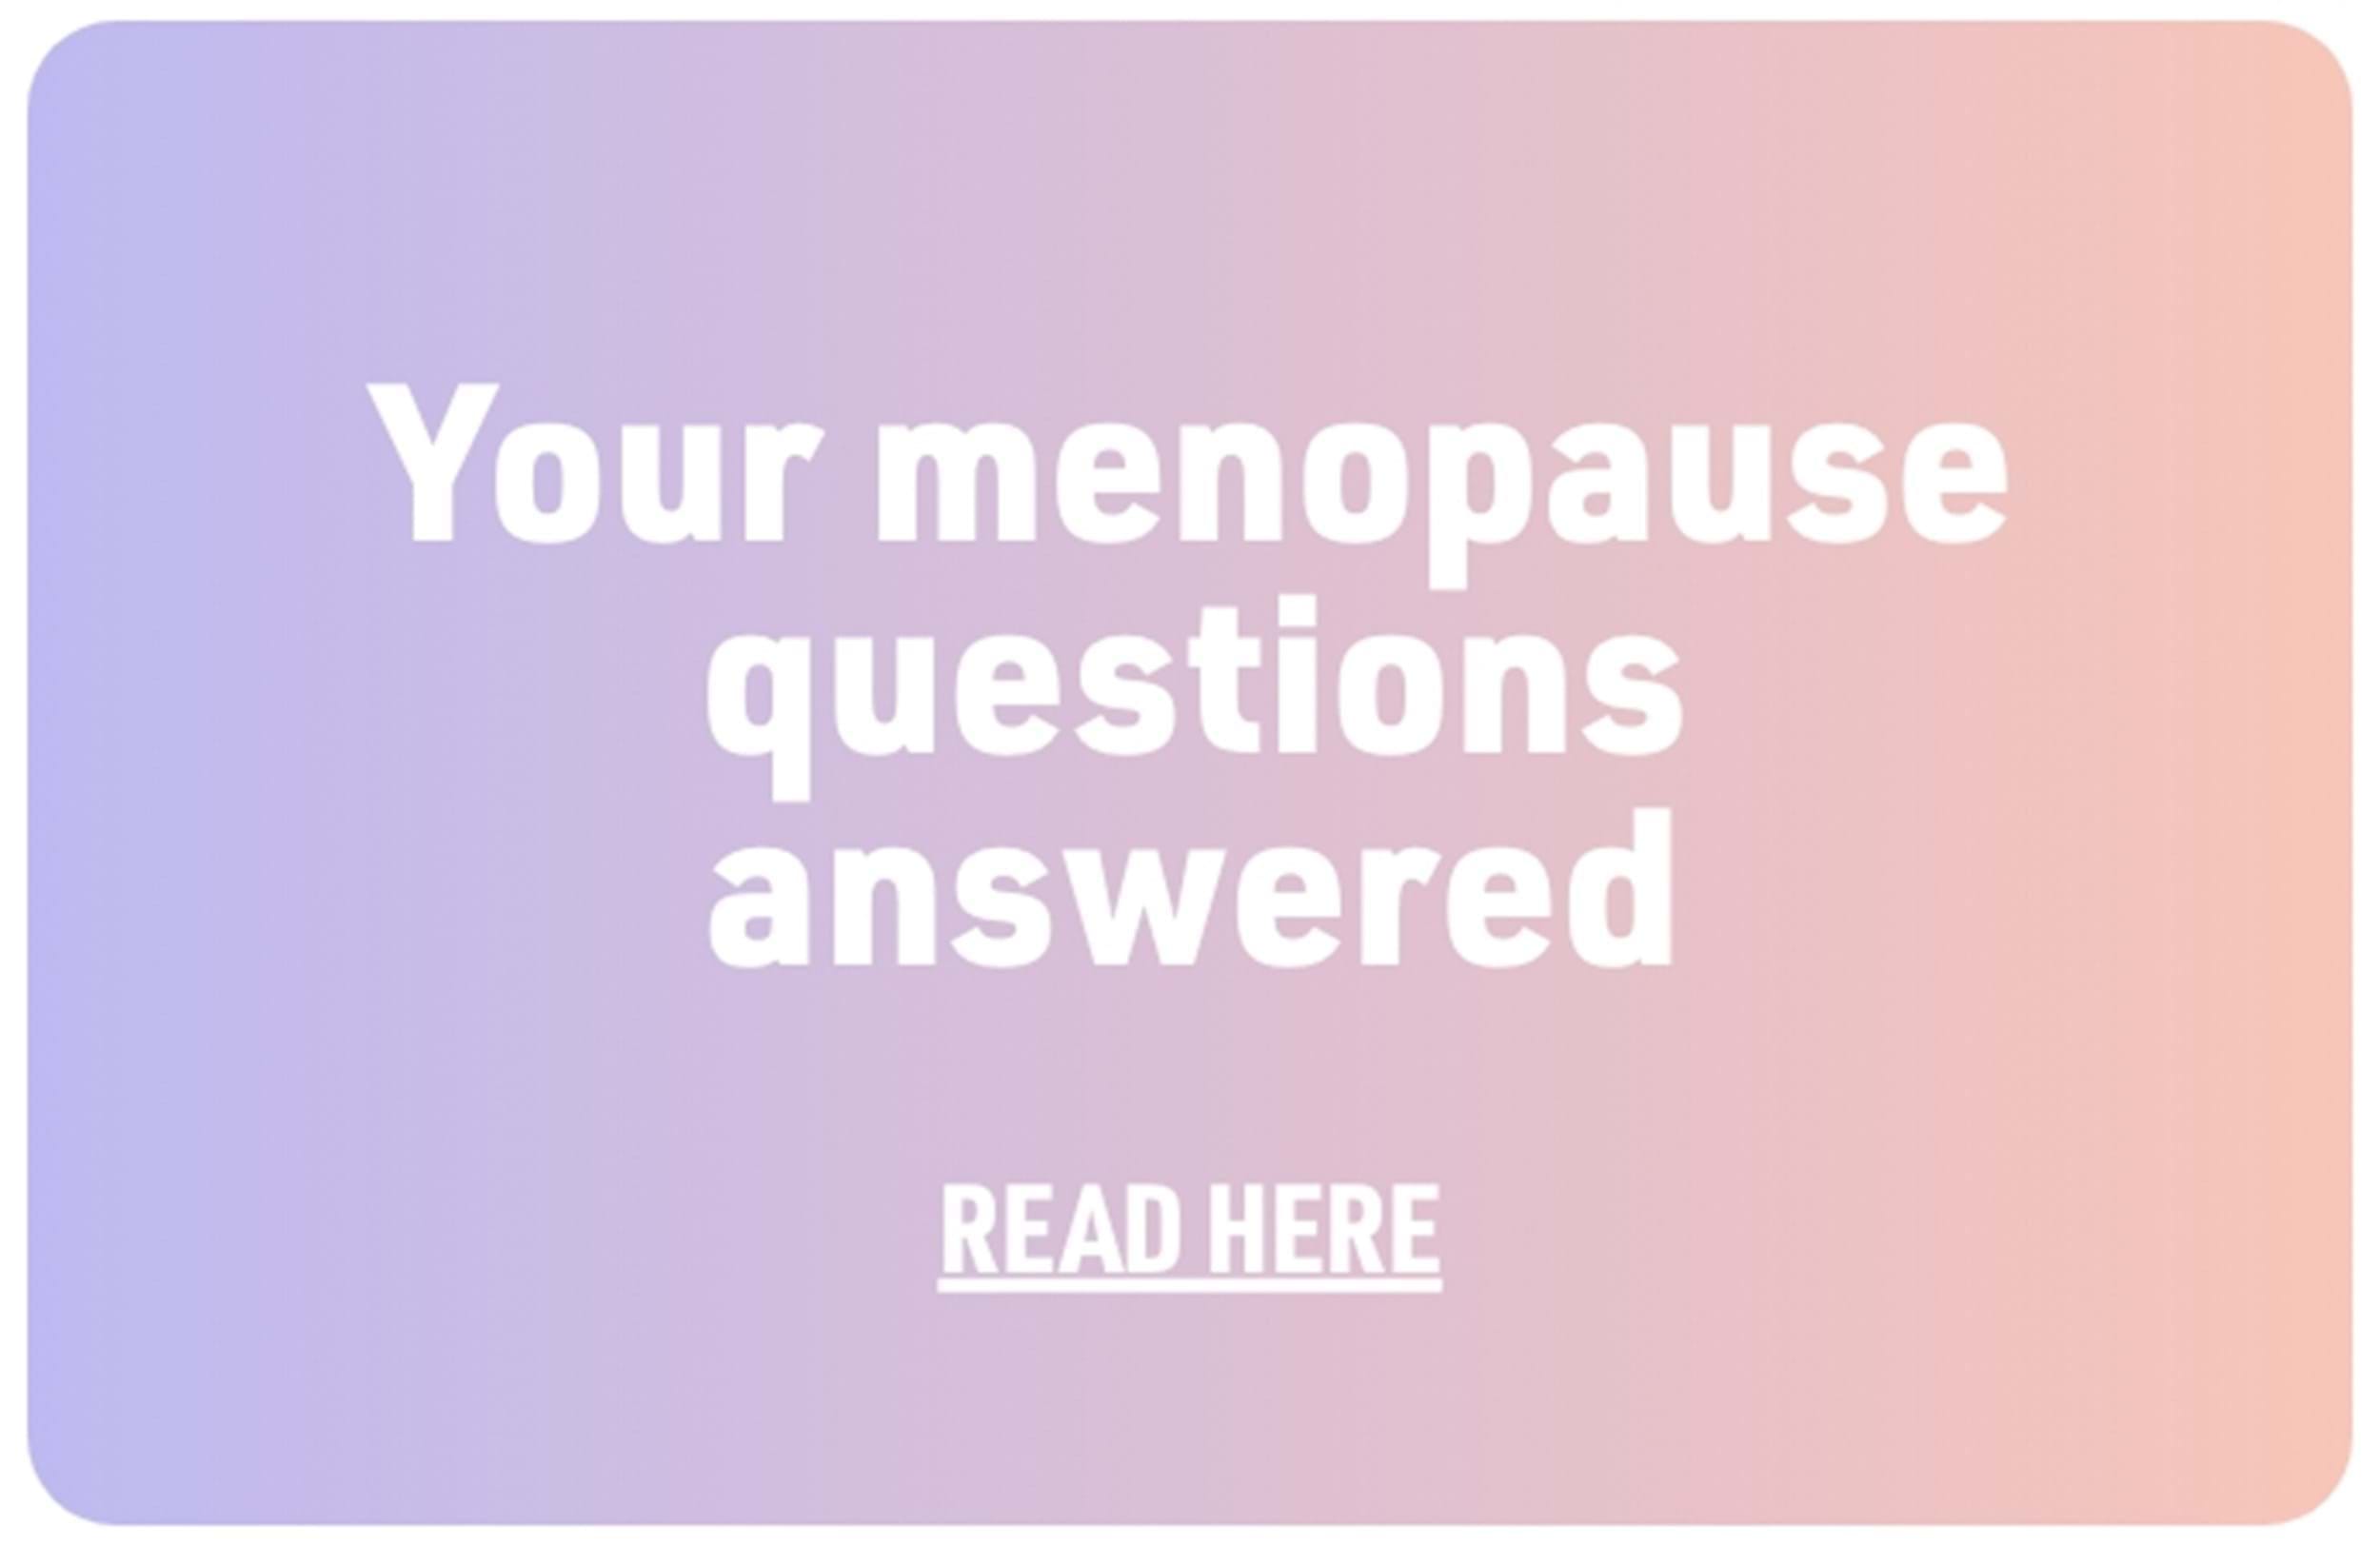 Your menopause questions answered